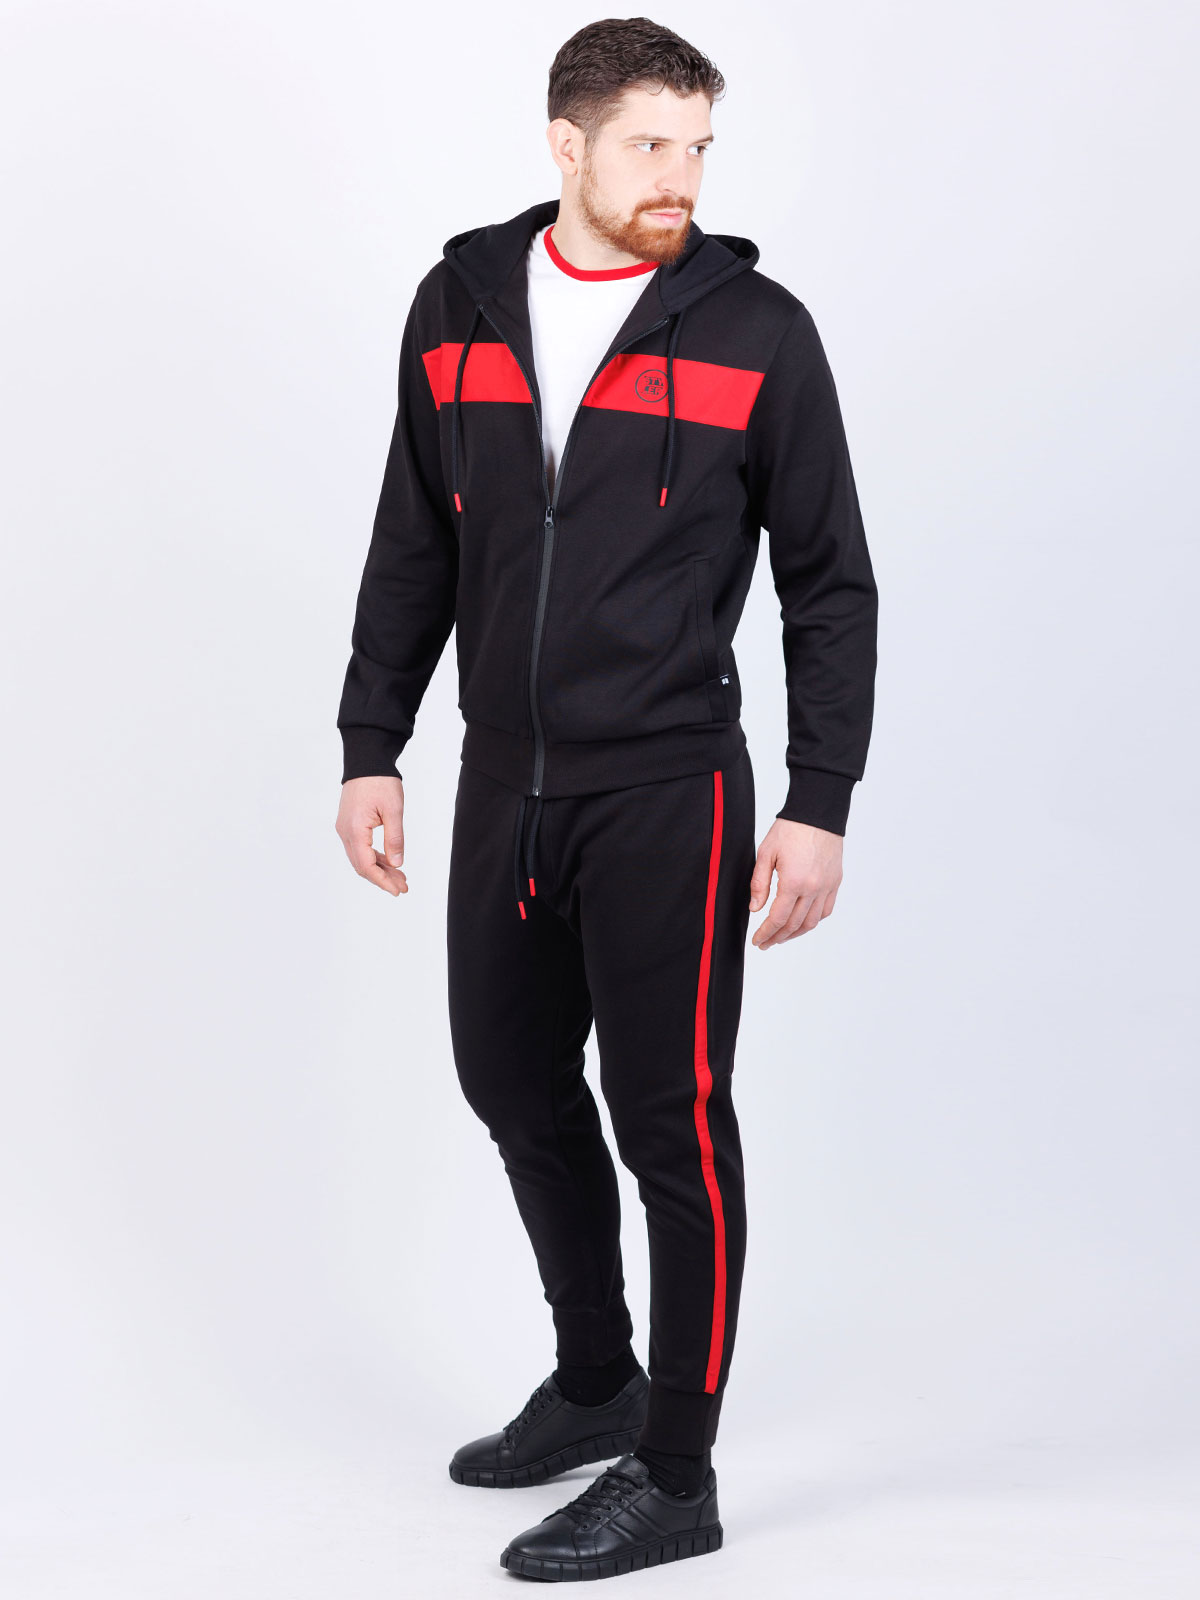 Sweatshirt in black with a red stripe - 28112 € 44.43 img4